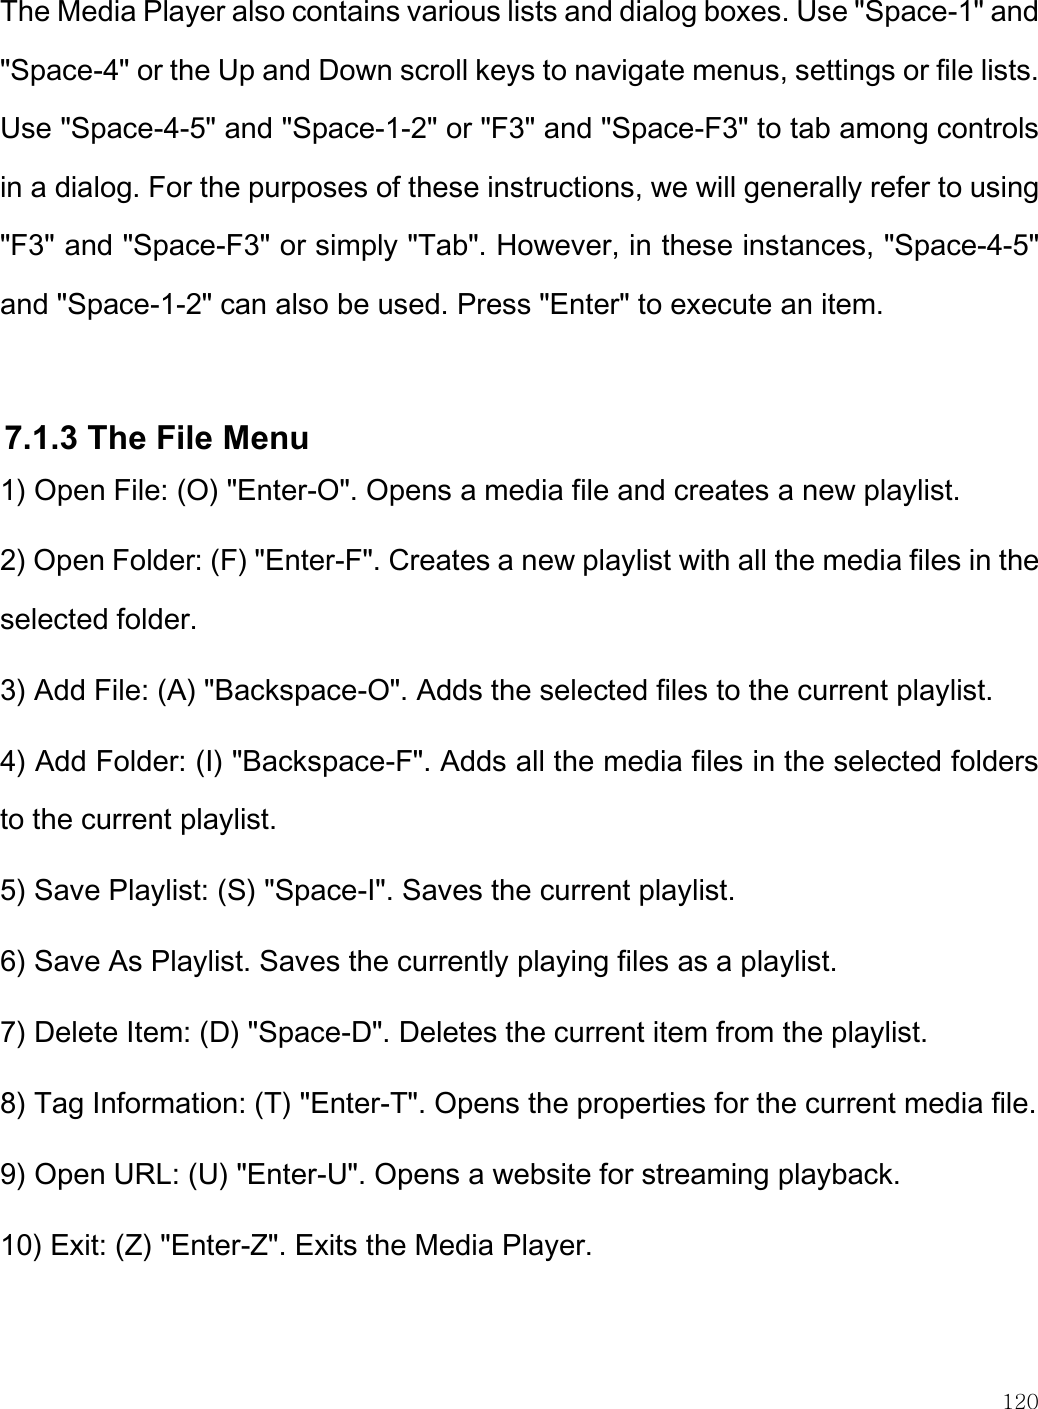    120  The Media Player also contains various lists and dialog boxes. Use &quot;Space-1&quot; and &quot;Space-4&quot; or the Up and Down scroll keys to navigate menus, settings or file lists. Use &quot;Space-4-5&quot; and &quot;Space-1-2&quot; or &quot;F3&quot; and &quot;Space-F3&quot; to tab among controls in a dialog. For the purposes of these instructions, we will generally refer to using &quot;F3&quot; and &quot;Space-F3&quot; or simply &quot;Tab&quot;. However, in these instances, &quot;Space-4-5&quot; and &quot;Space-1-2&quot; can also be used. Press &quot;Enter&quot; to execute an item.  7.1.3 The File Menu 1) Open File: (O) &quot;Enter-O&quot;. Opens a media file and creates a new playlist. 2) Open Folder: (F) &quot;Enter-F&quot;. Creates a new playlist with all the media files in the selected folder. 3) Add File: (A) &quot;Backspace-O&quot;. Adds the selected files to the current playlist. 4) Add Folder: (I) &quot;Backspace-F&quot;. Adds all the media files in the selected folders to the current playlist. 5) Save Playlist: (S) &quot;Space-I&quot;. Saves the current playlist. 6) Save As Playlist. Saves the currently playing files as a playlist. 7) Delete Item: (D) &quot;Space-D&quot;. Deletes the current item from the playlist. 8) Tag Information: (T) &quot;Enter-T&quot;. Opens the properties for the current media file. 9) Open URL: (U) &quot;Enter-U&quot;. Opens a website for streaming playback. 10) Exit: (Z) &quot;Enter-Z&quot;. Exits the Media Player.  